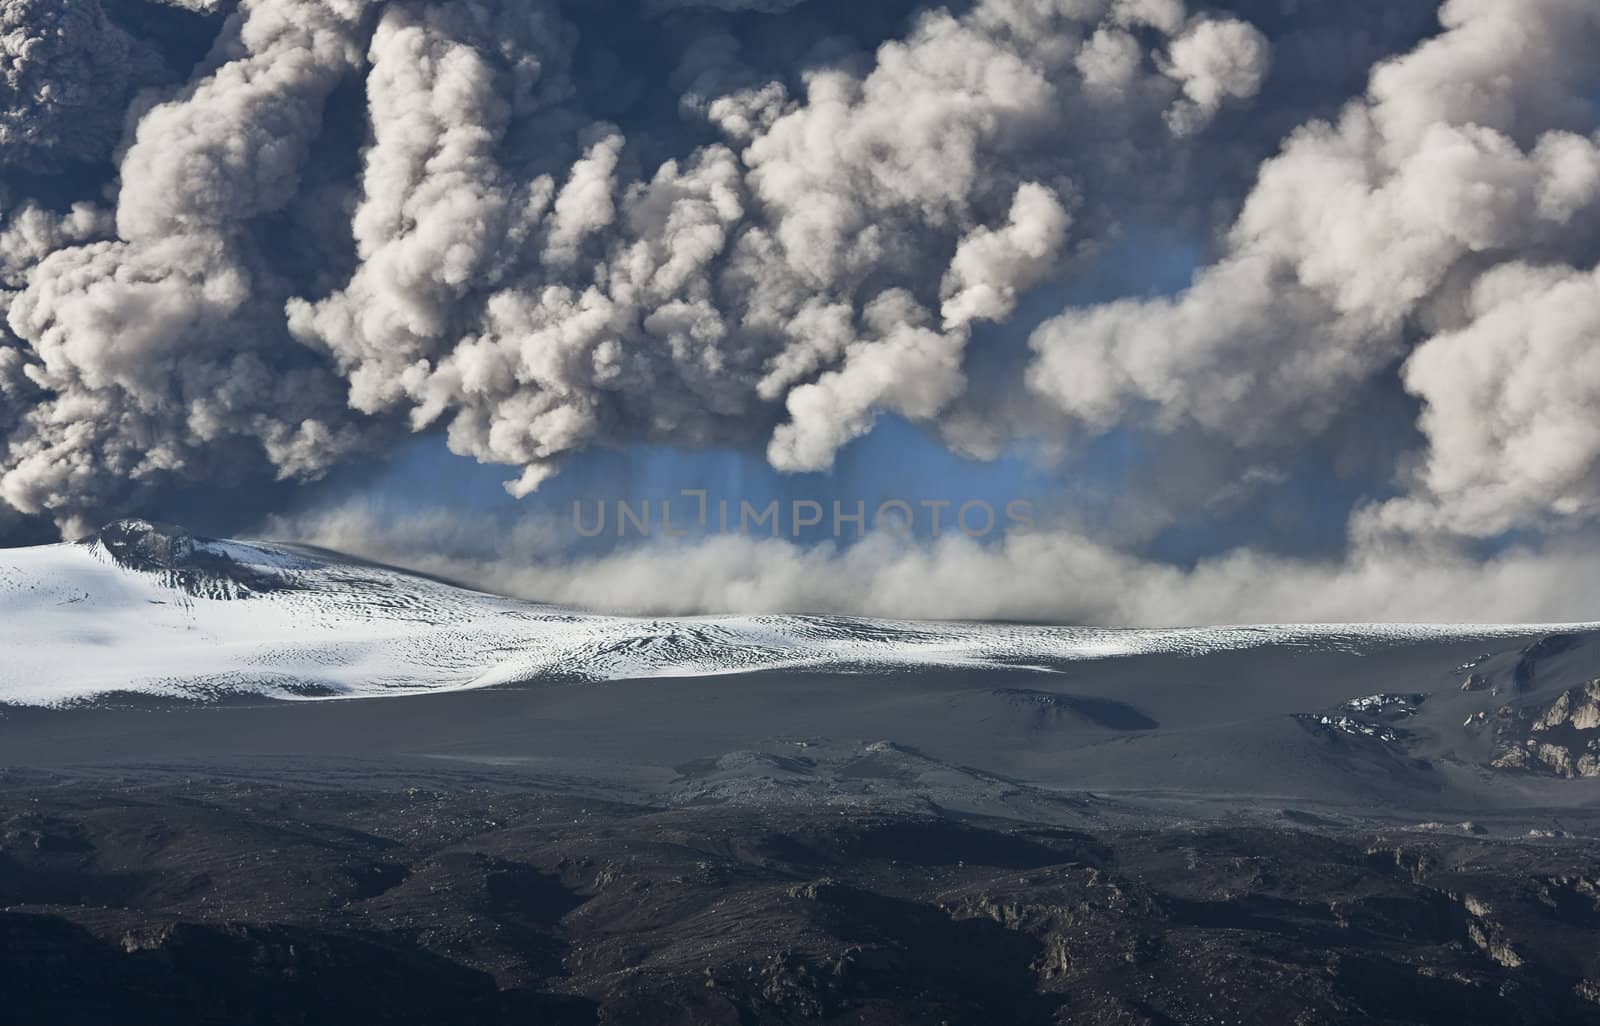 Ash cloud fallout from the Eyjafjallajokull eruption in Iceland